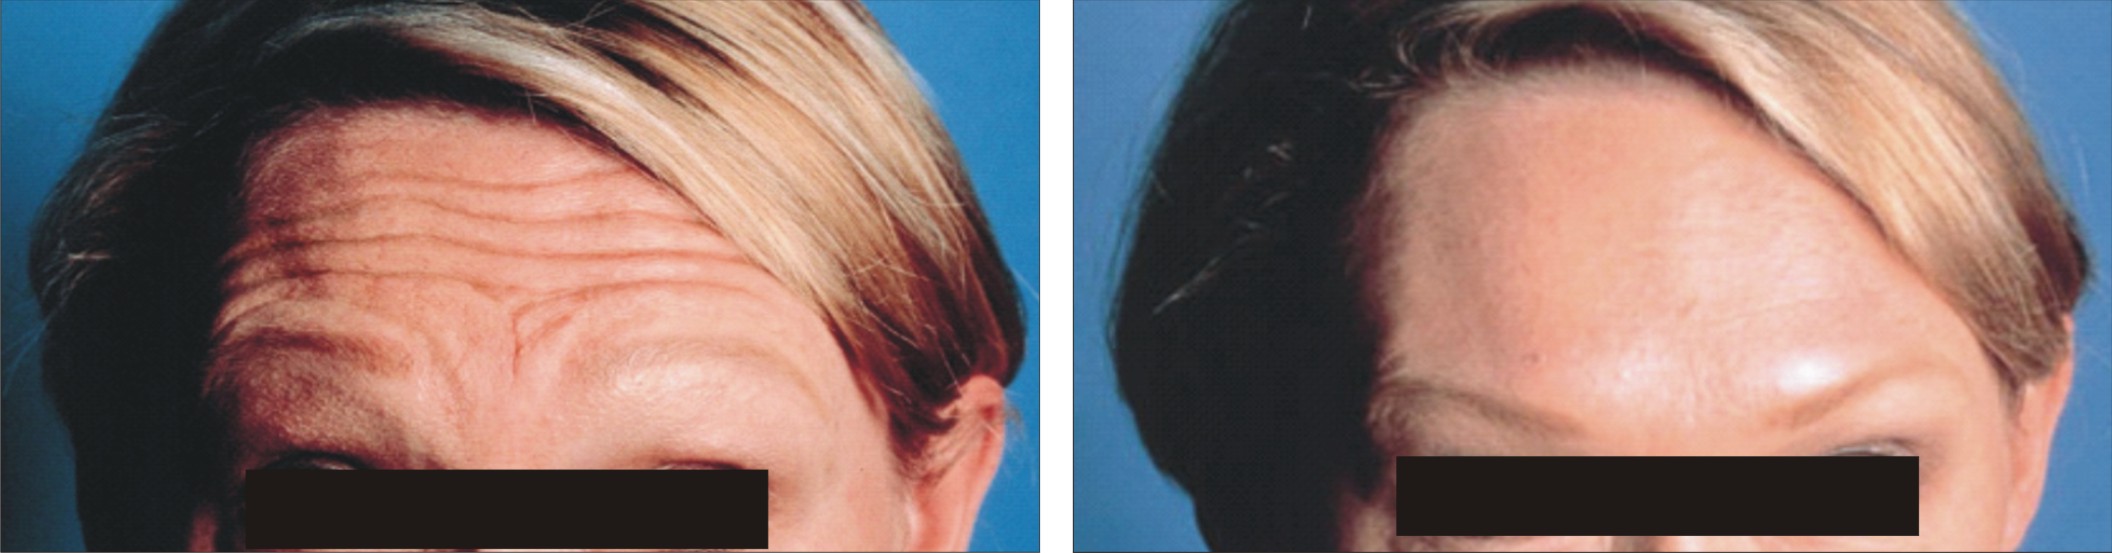 Botulinum Toxin A Image One